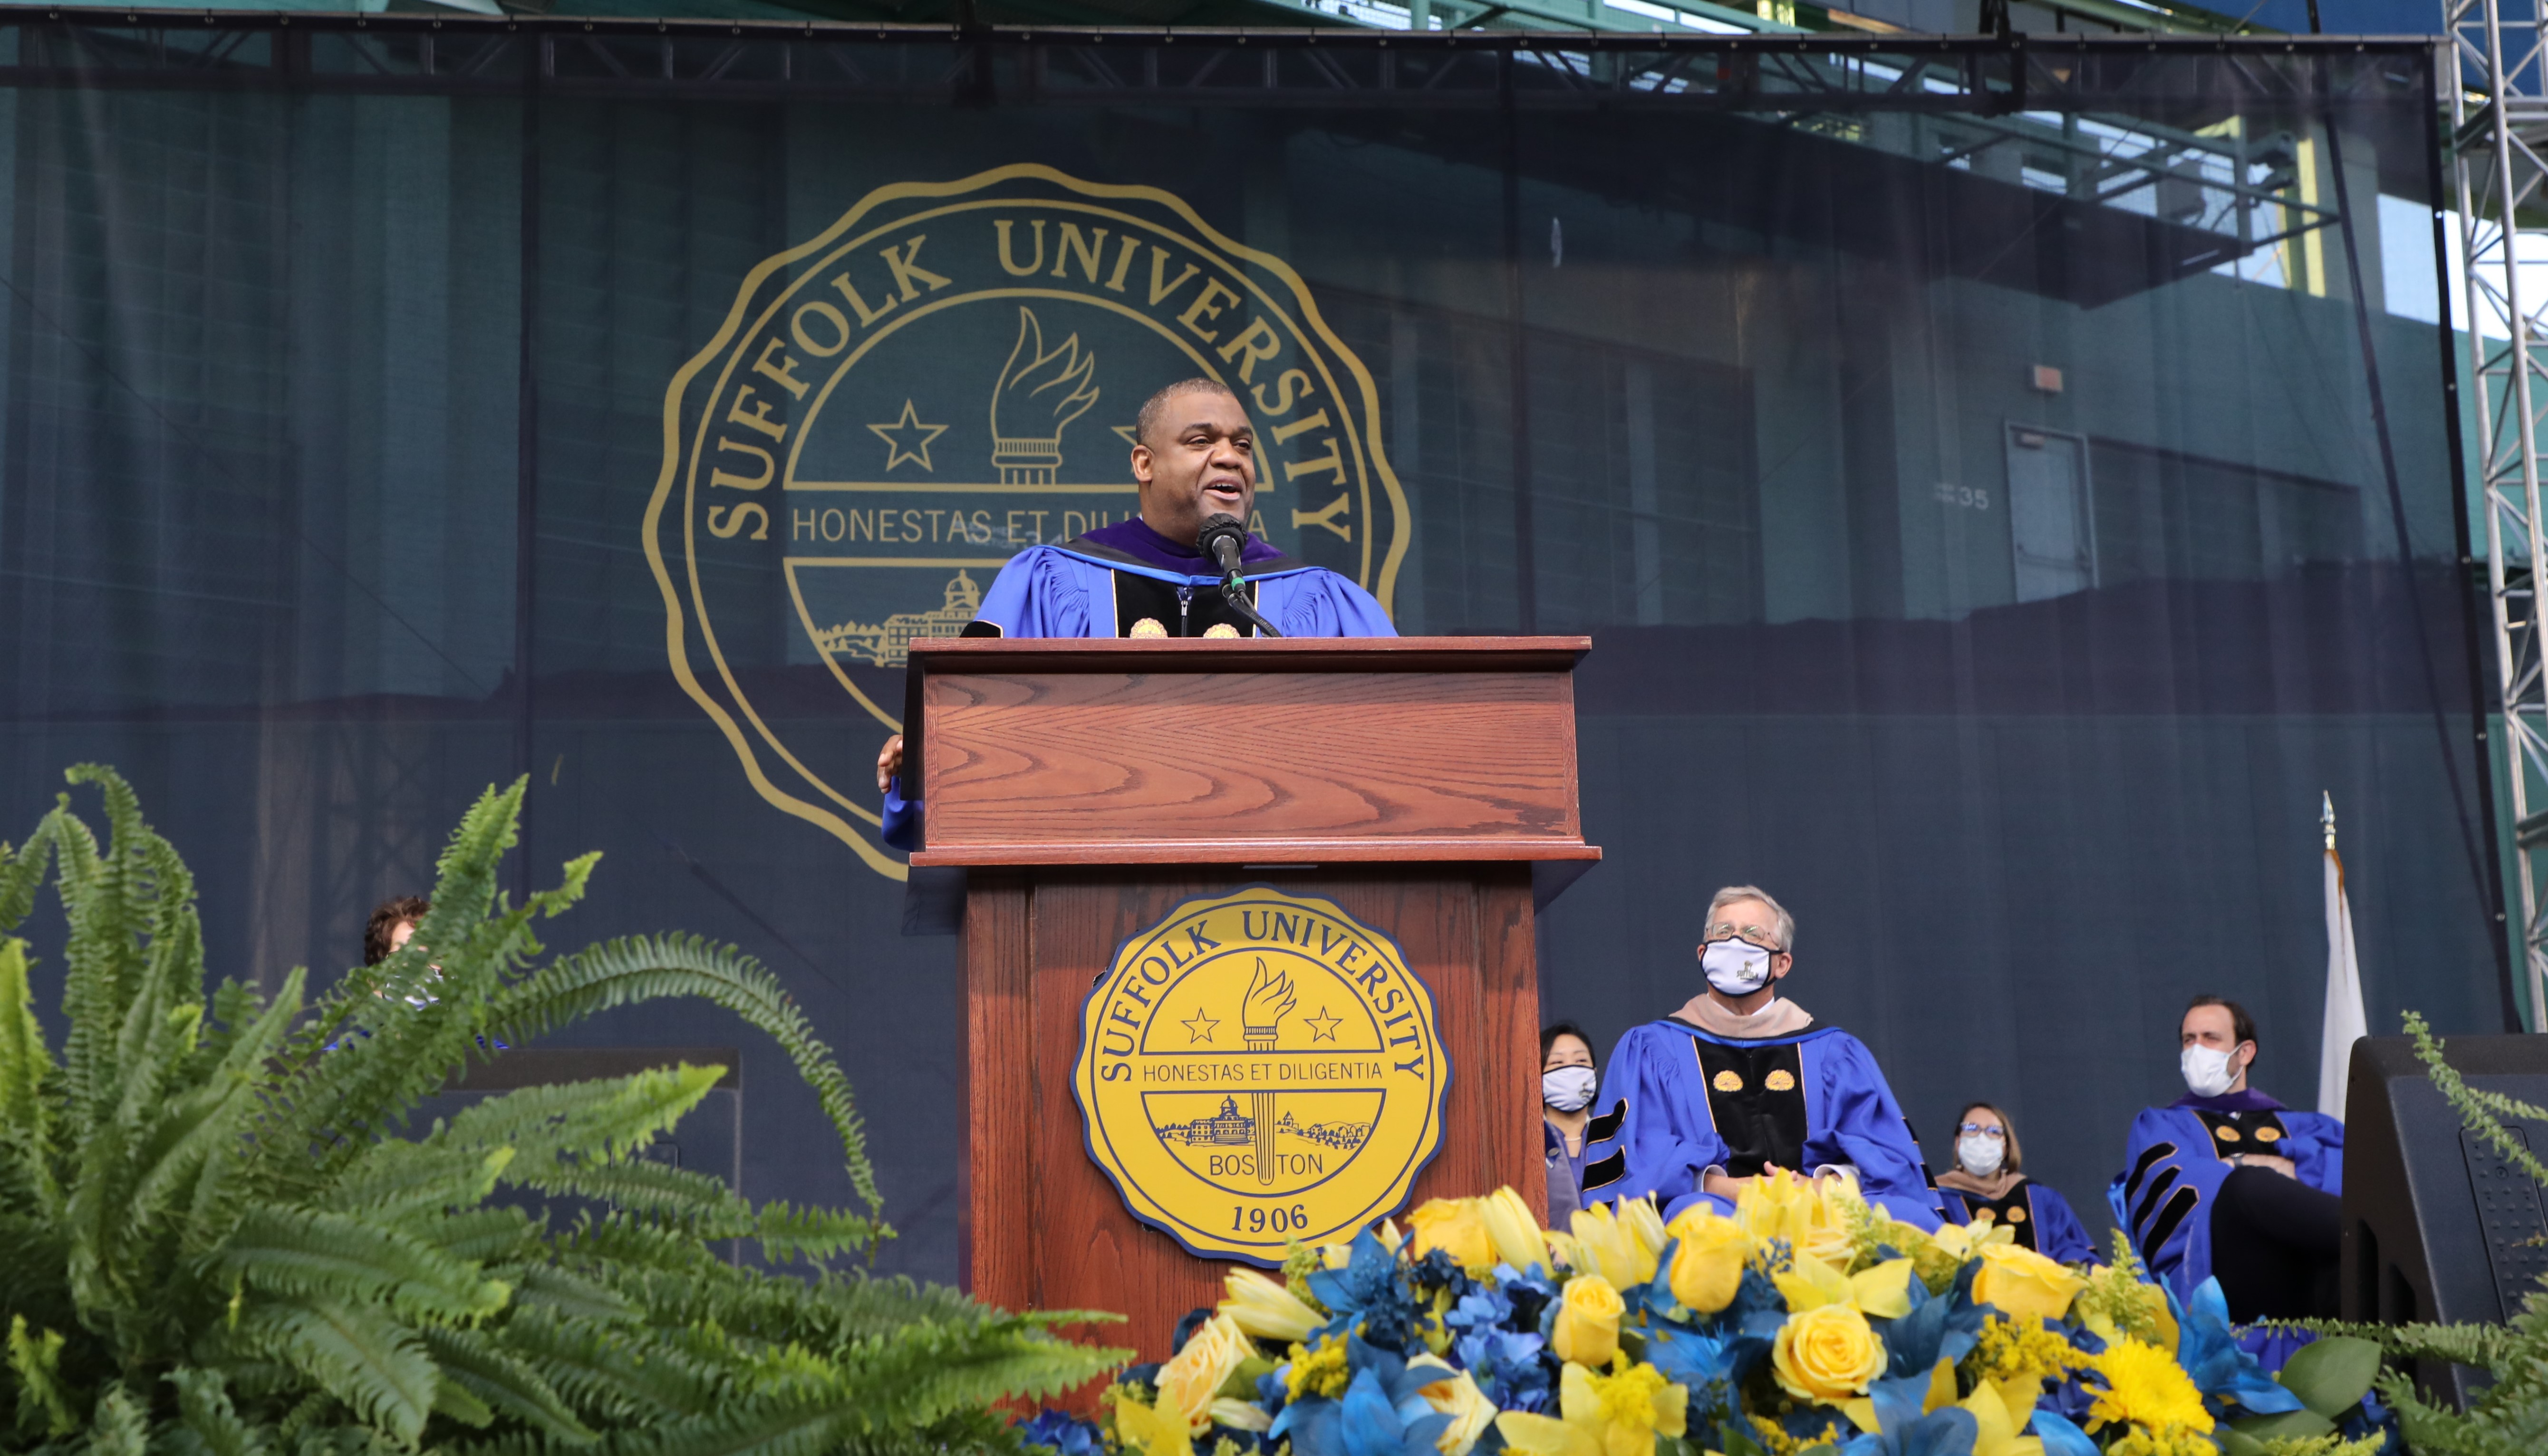 The Hon. Serge Georges Jr. speaks on stage at the College of Arts & Sciences Commencement